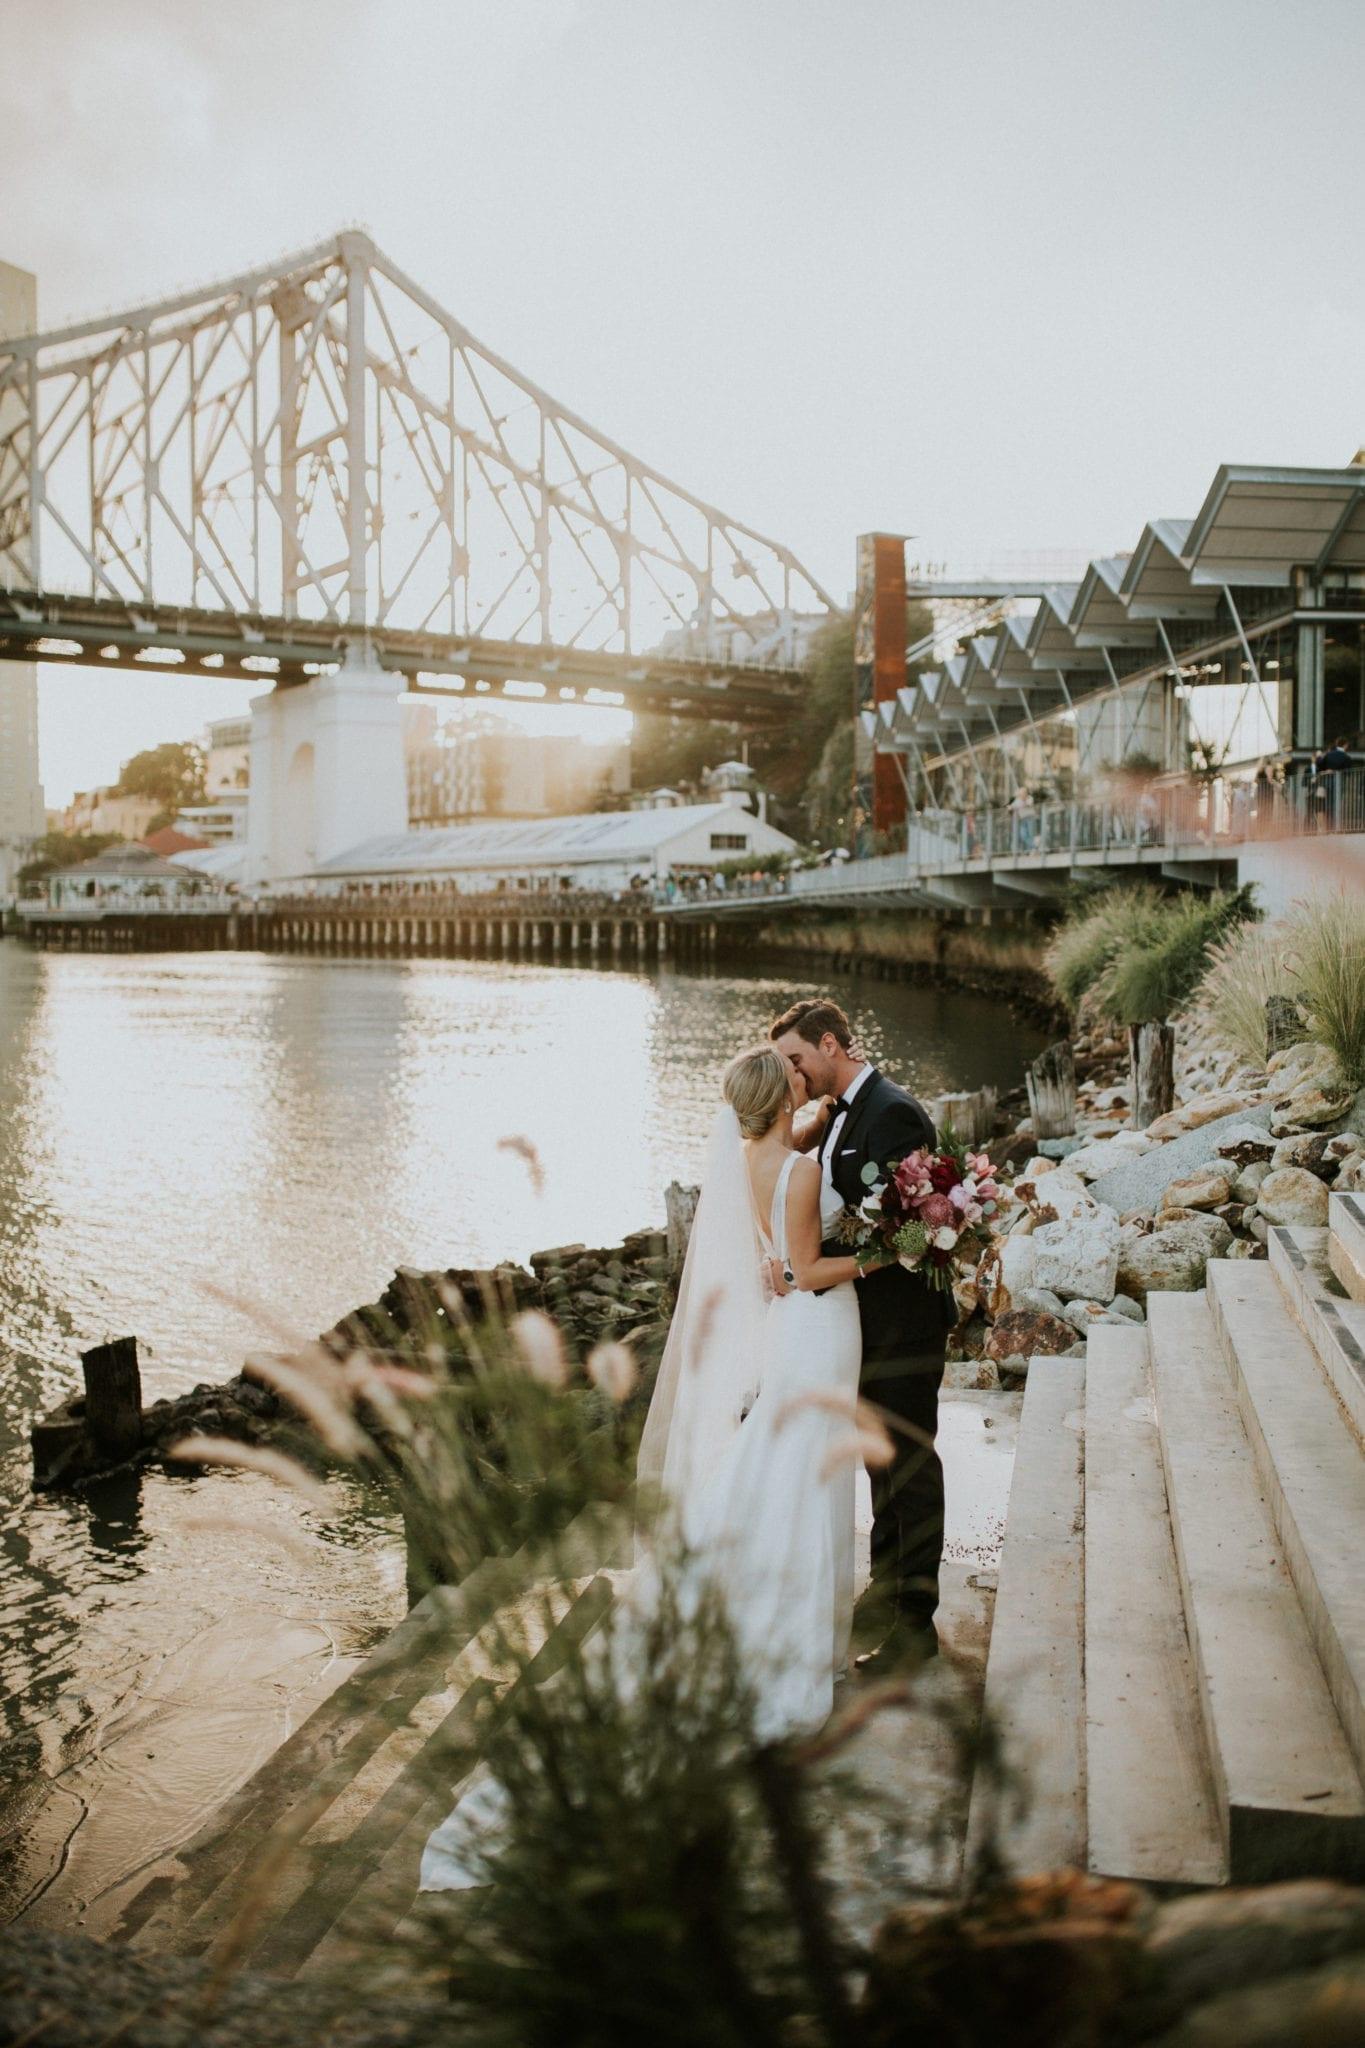 Jess & Mitch's Modern Industrial Wedding - White Lily Couture